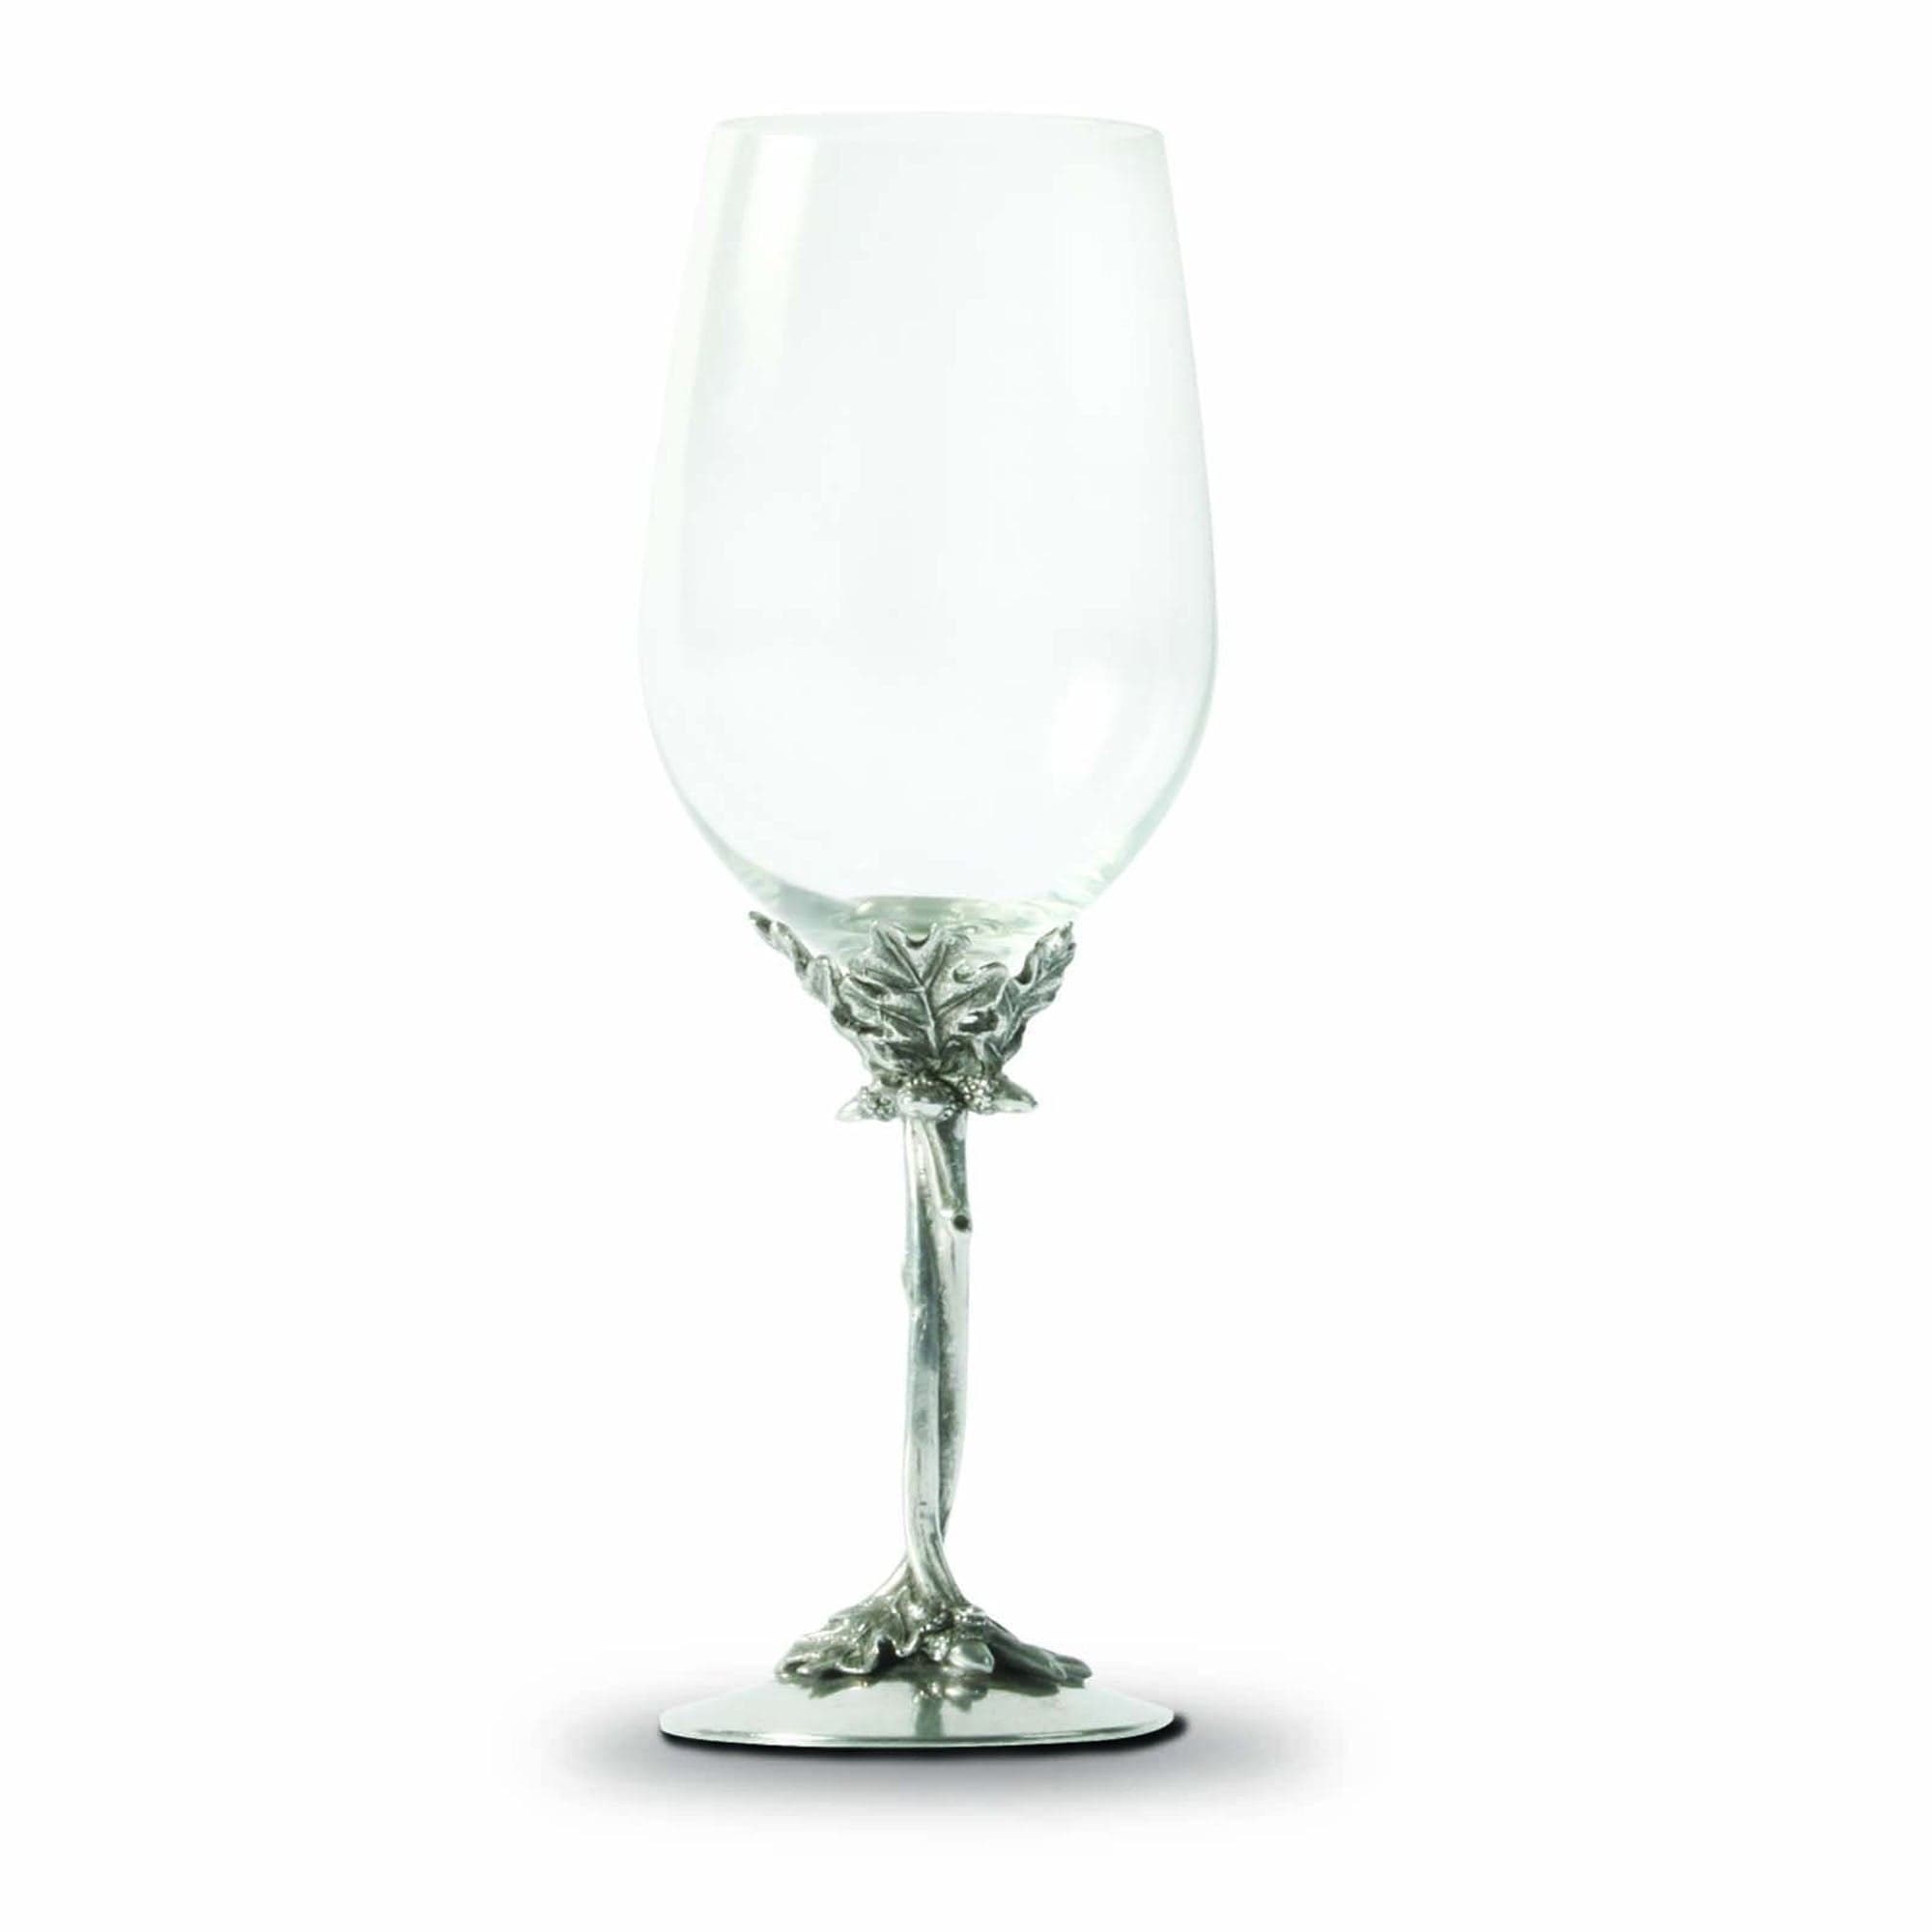 https://cdn.shopify.com/s/files/1/1994/6745/products/vagabond-house-majestic-forest-white-10-h-12-25-oz-entwined-oak-pewter-stemware-l2444t-1-31281593319472_2000x.jpg?v=1678115622